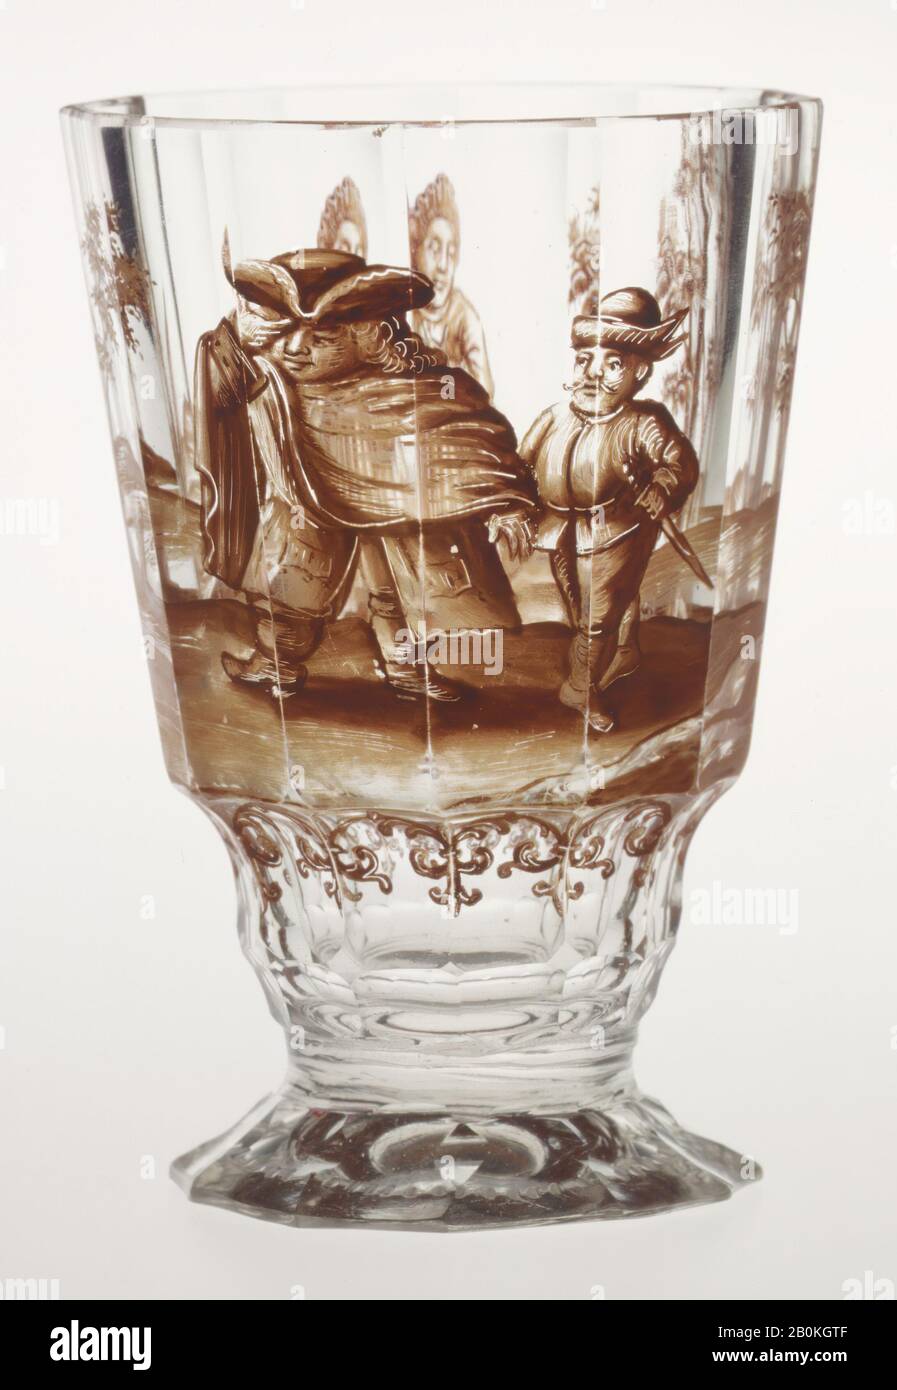 Beaker, German, 1720–30, German, Glass, painted, Overall: 3 5/8 × 2 1/2 in. (9.2 × 6.4 cm), Glass Stock Photo